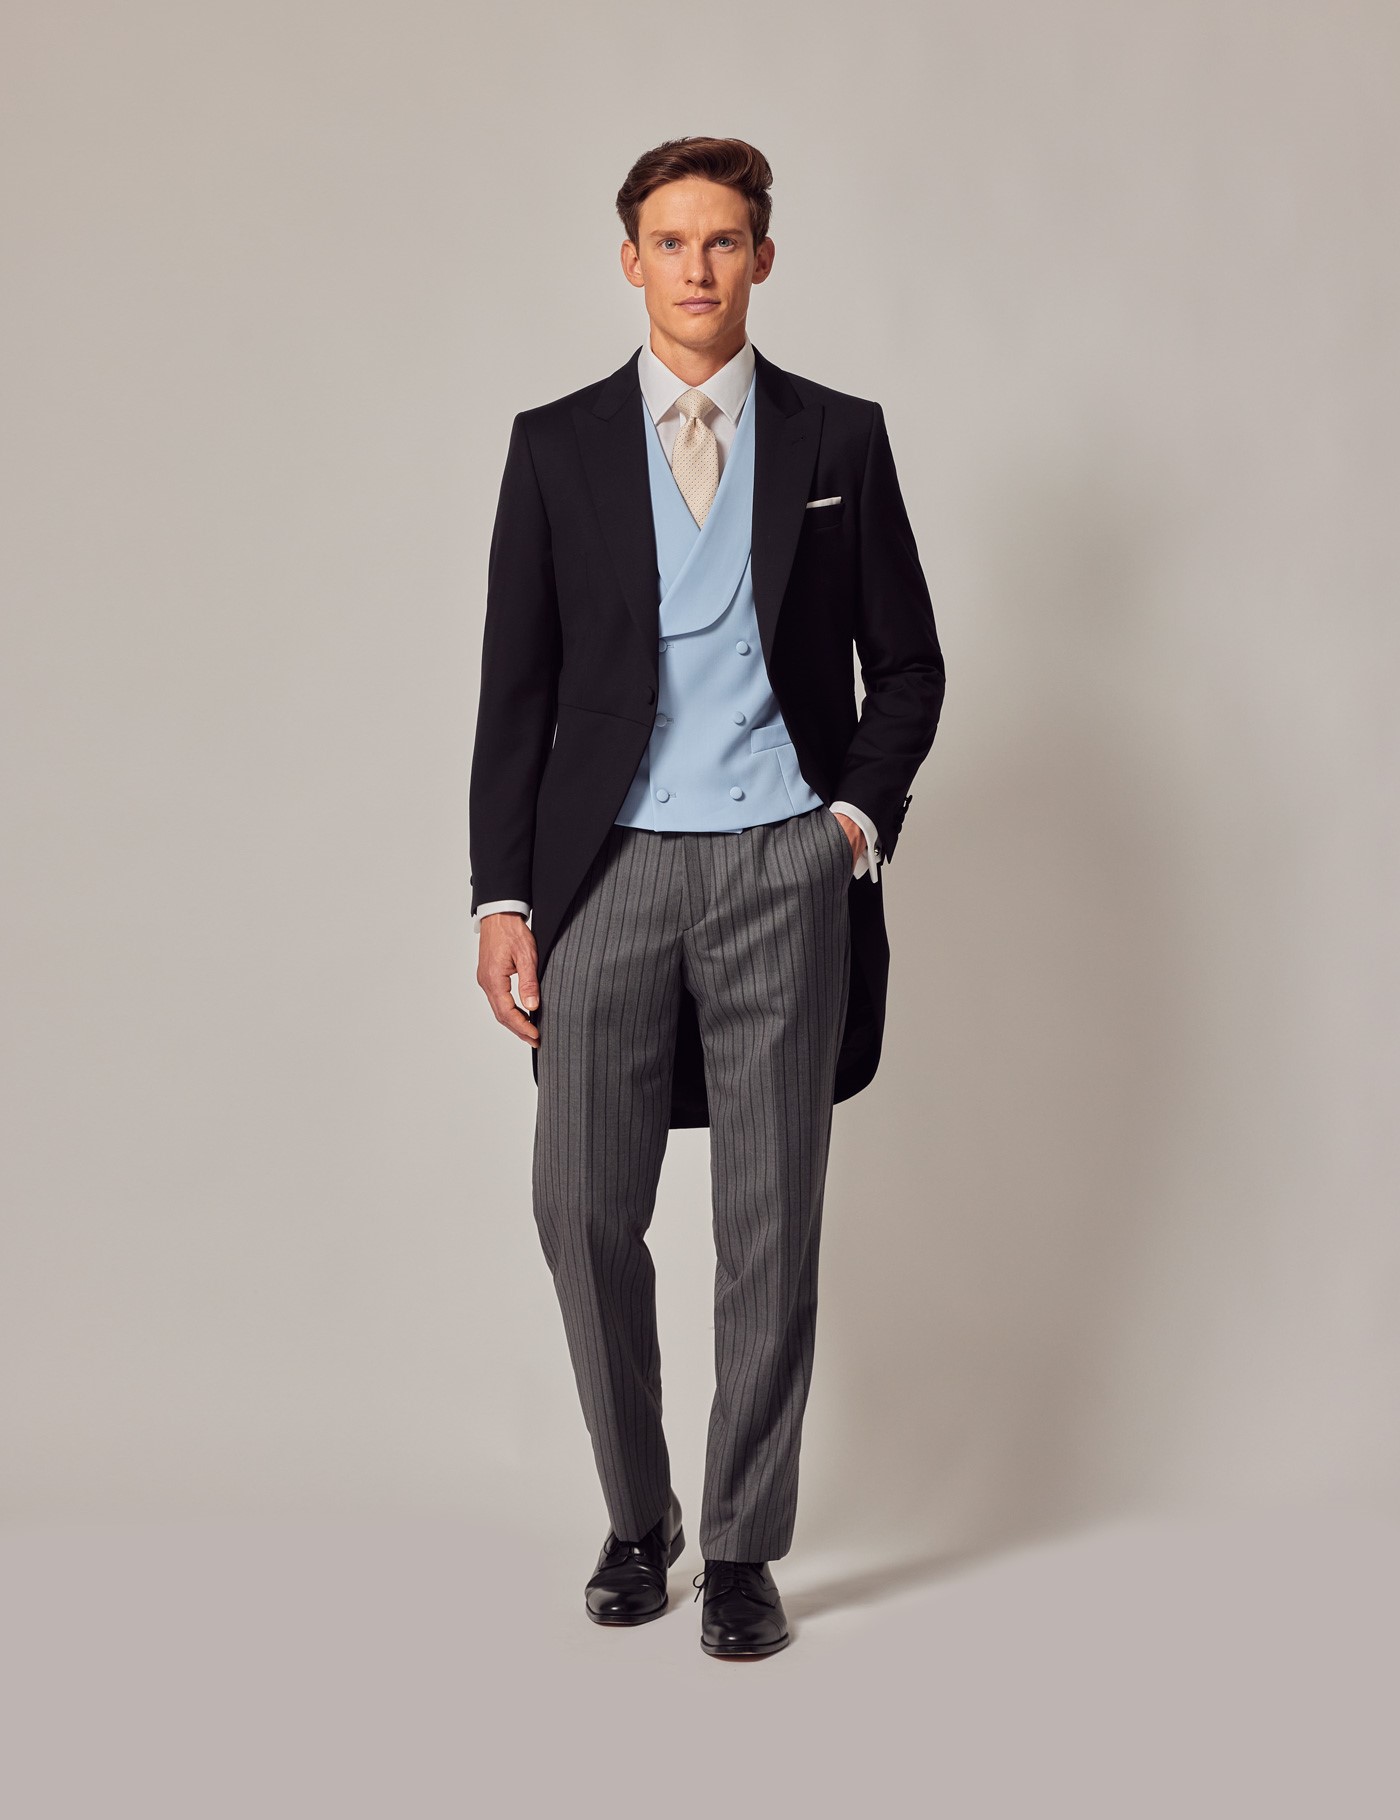 ExHire Morning Suit Trousers  Navy Blue Striped Trousers  Tweedmans